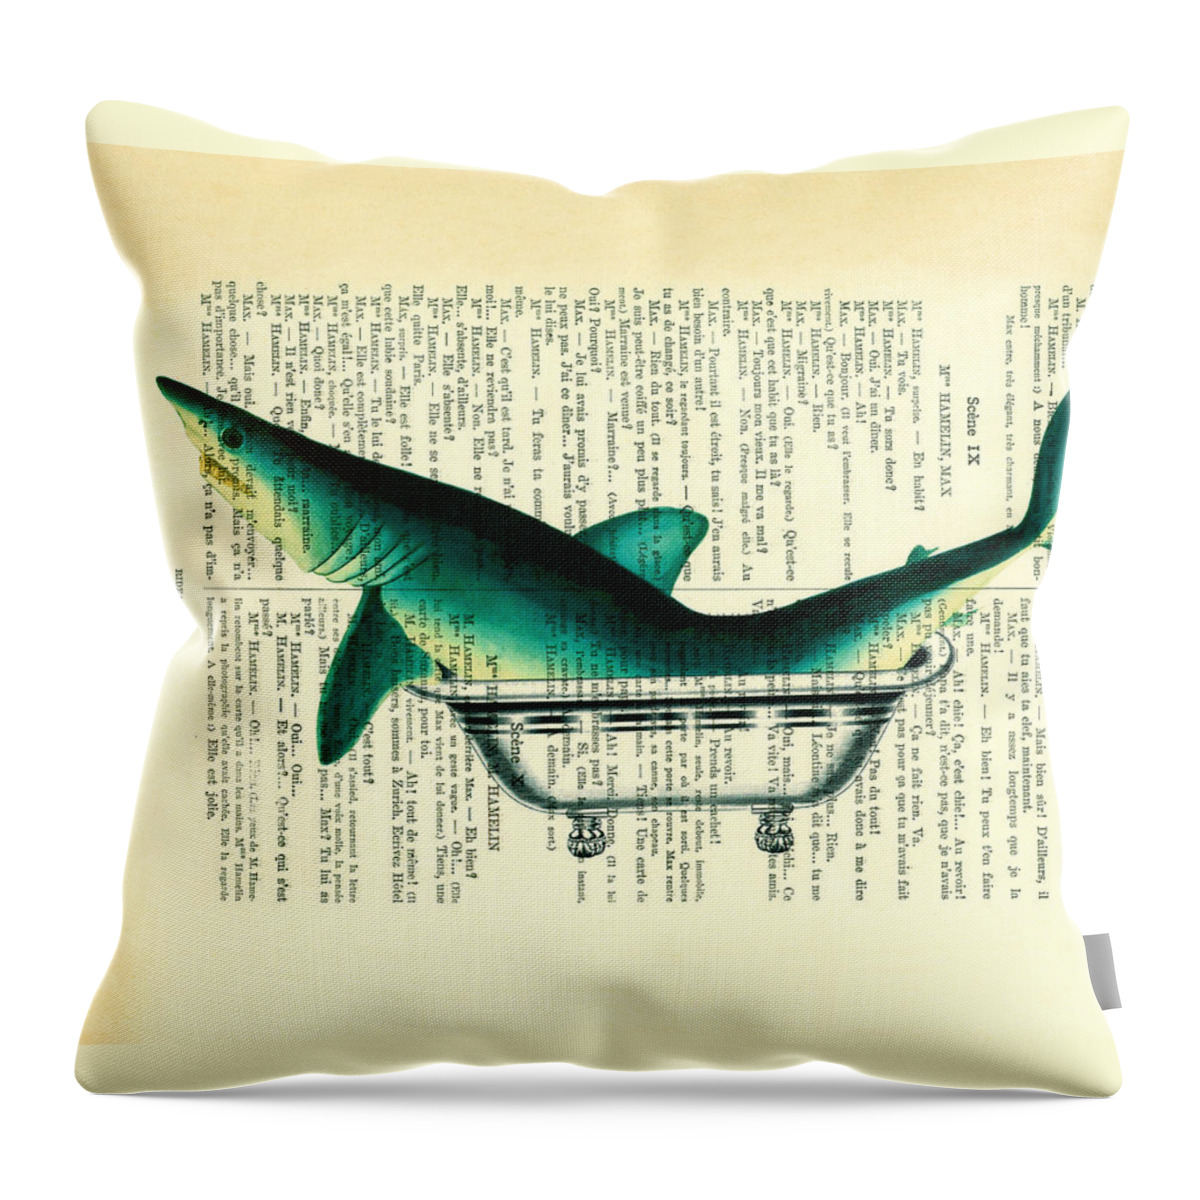 Shark Throw Pillow featuring the digital art Shark in bathtub illustration on dictionary paper by Madame Memento